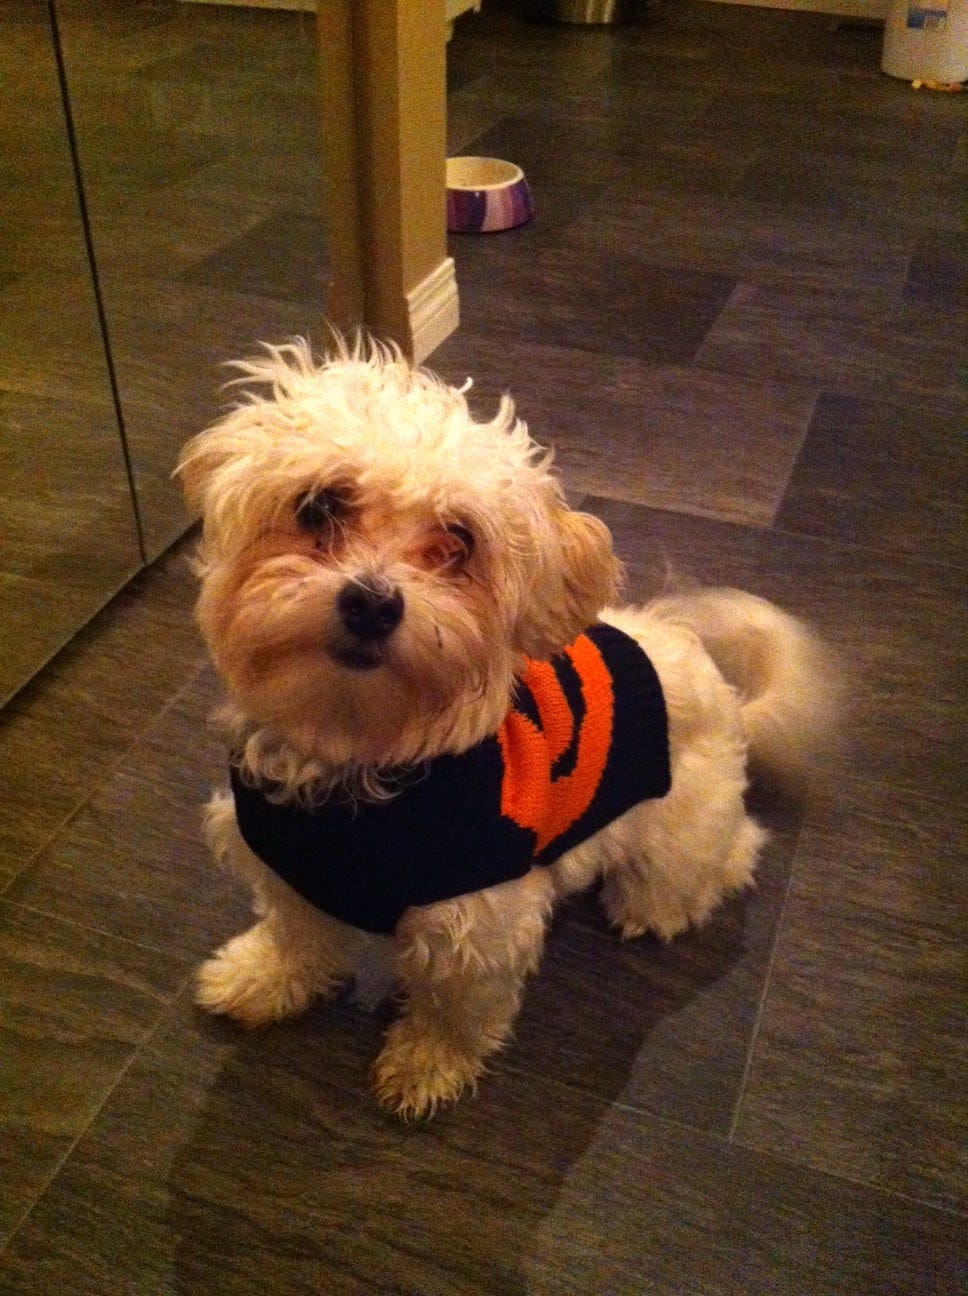 Puppy wearing a sweater with a pumpkin on it